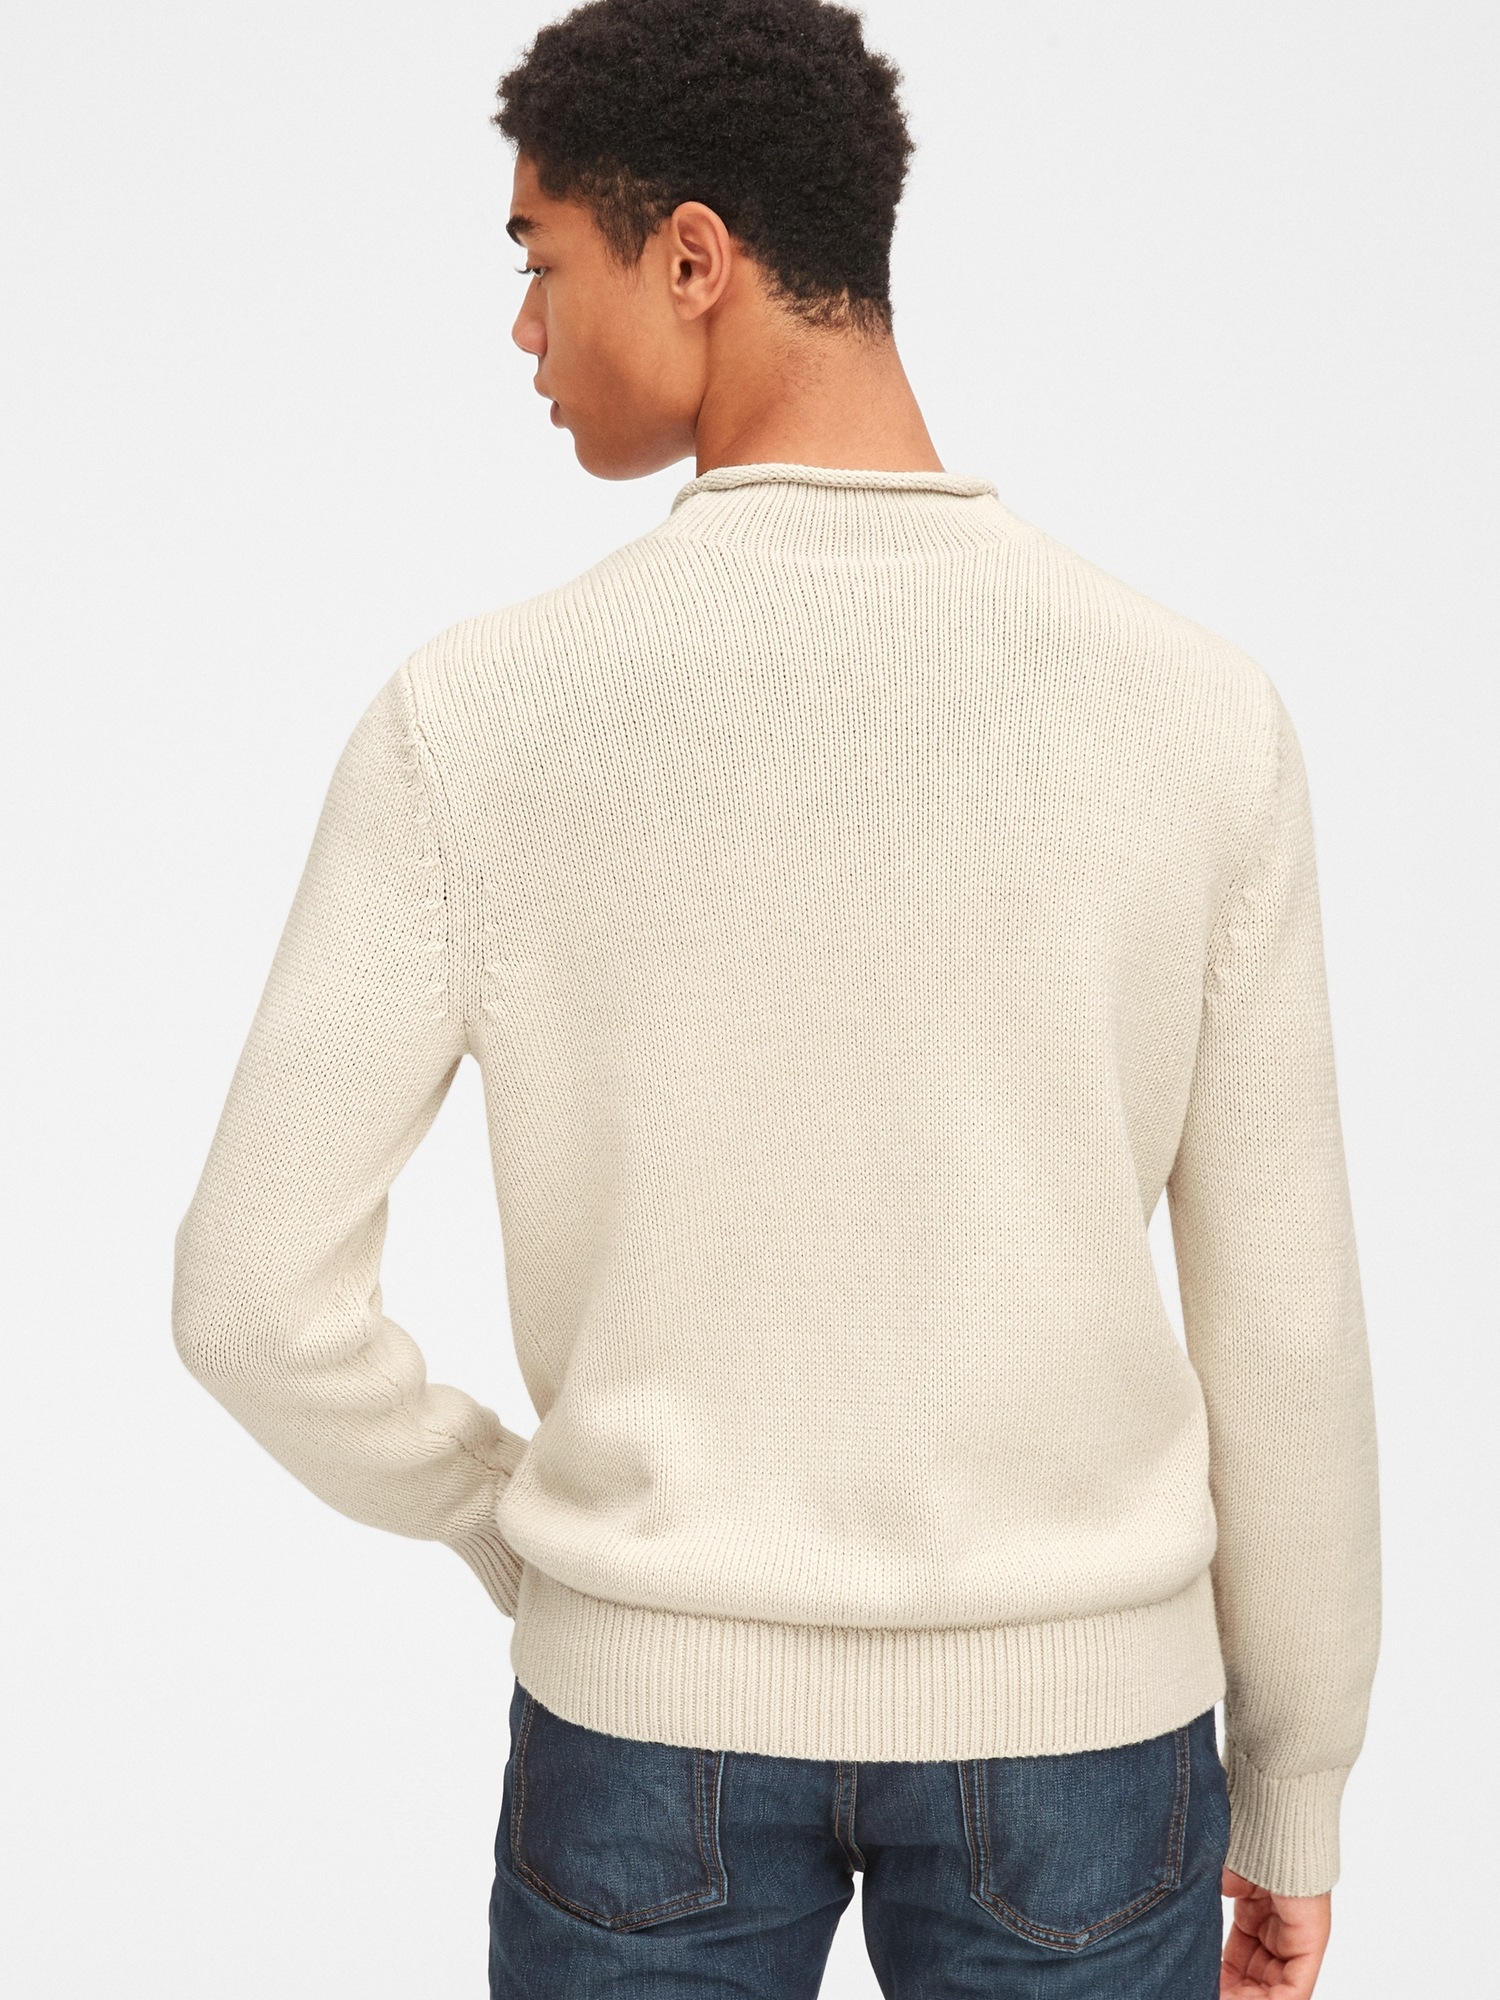 Fisherman Ribbed Roll Neck Pullover Sweater | Gap